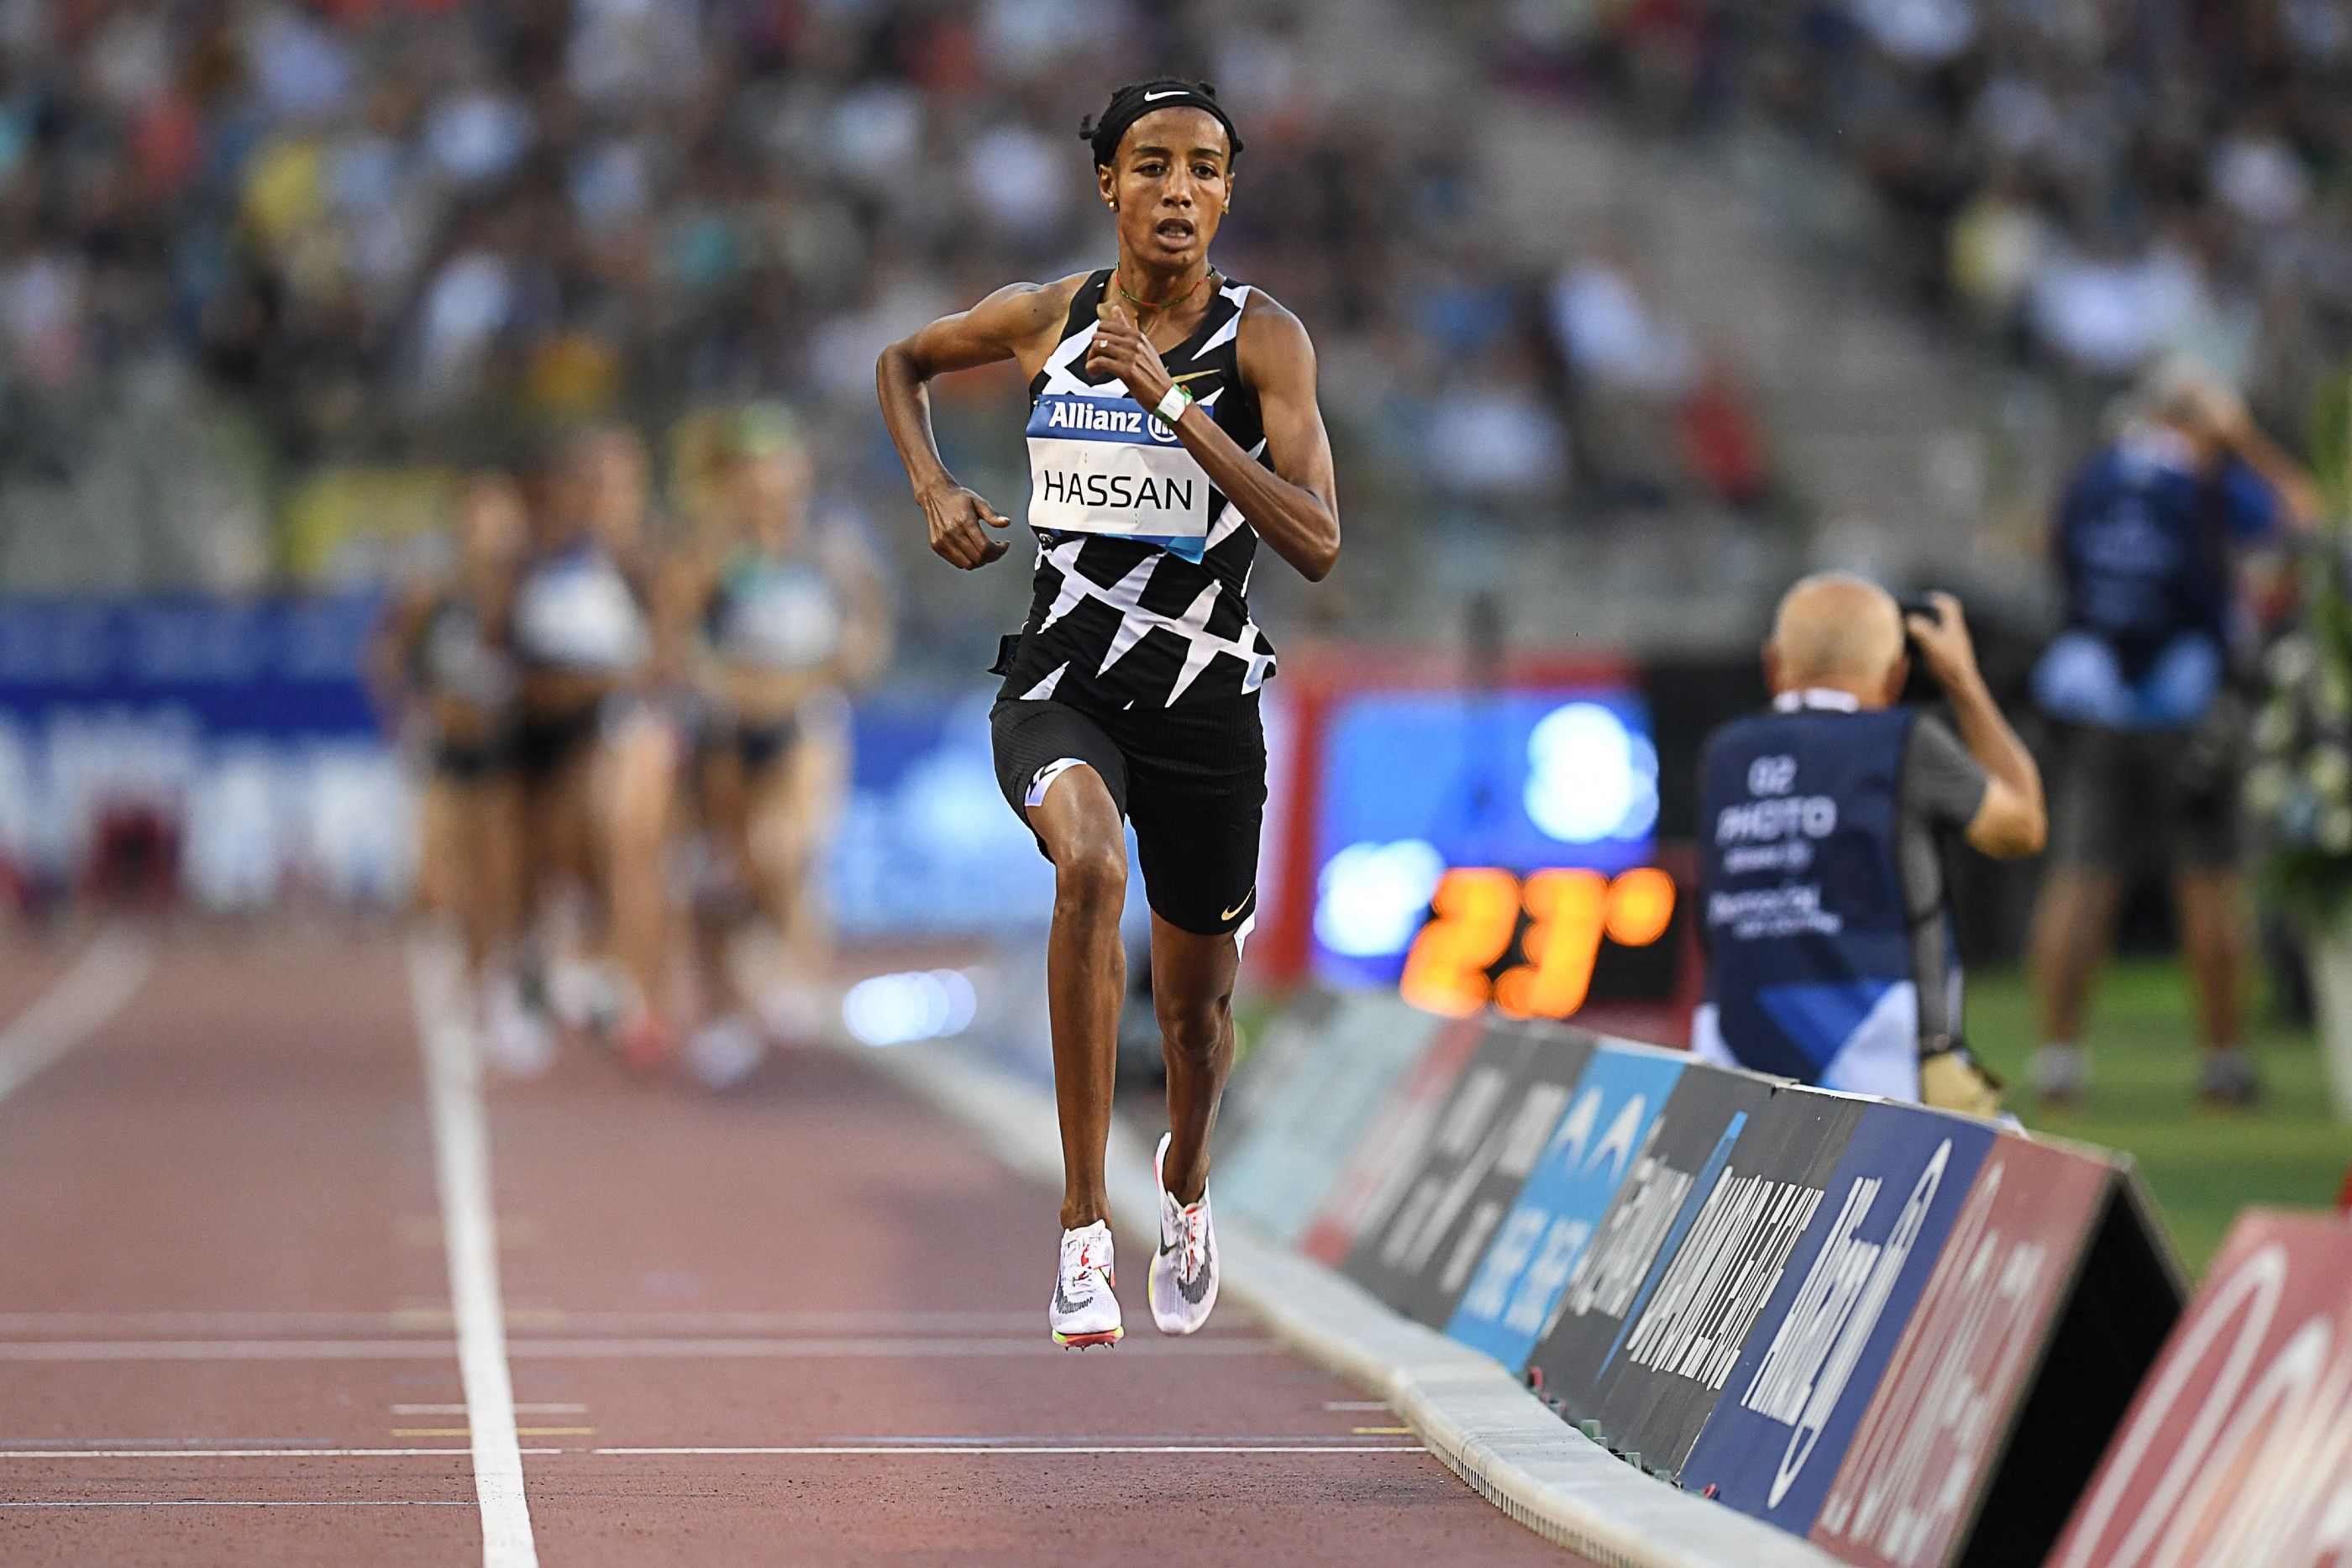 Sifan Hassan on her way to a mile win at the Wanda Diamond League meeting in Brussels